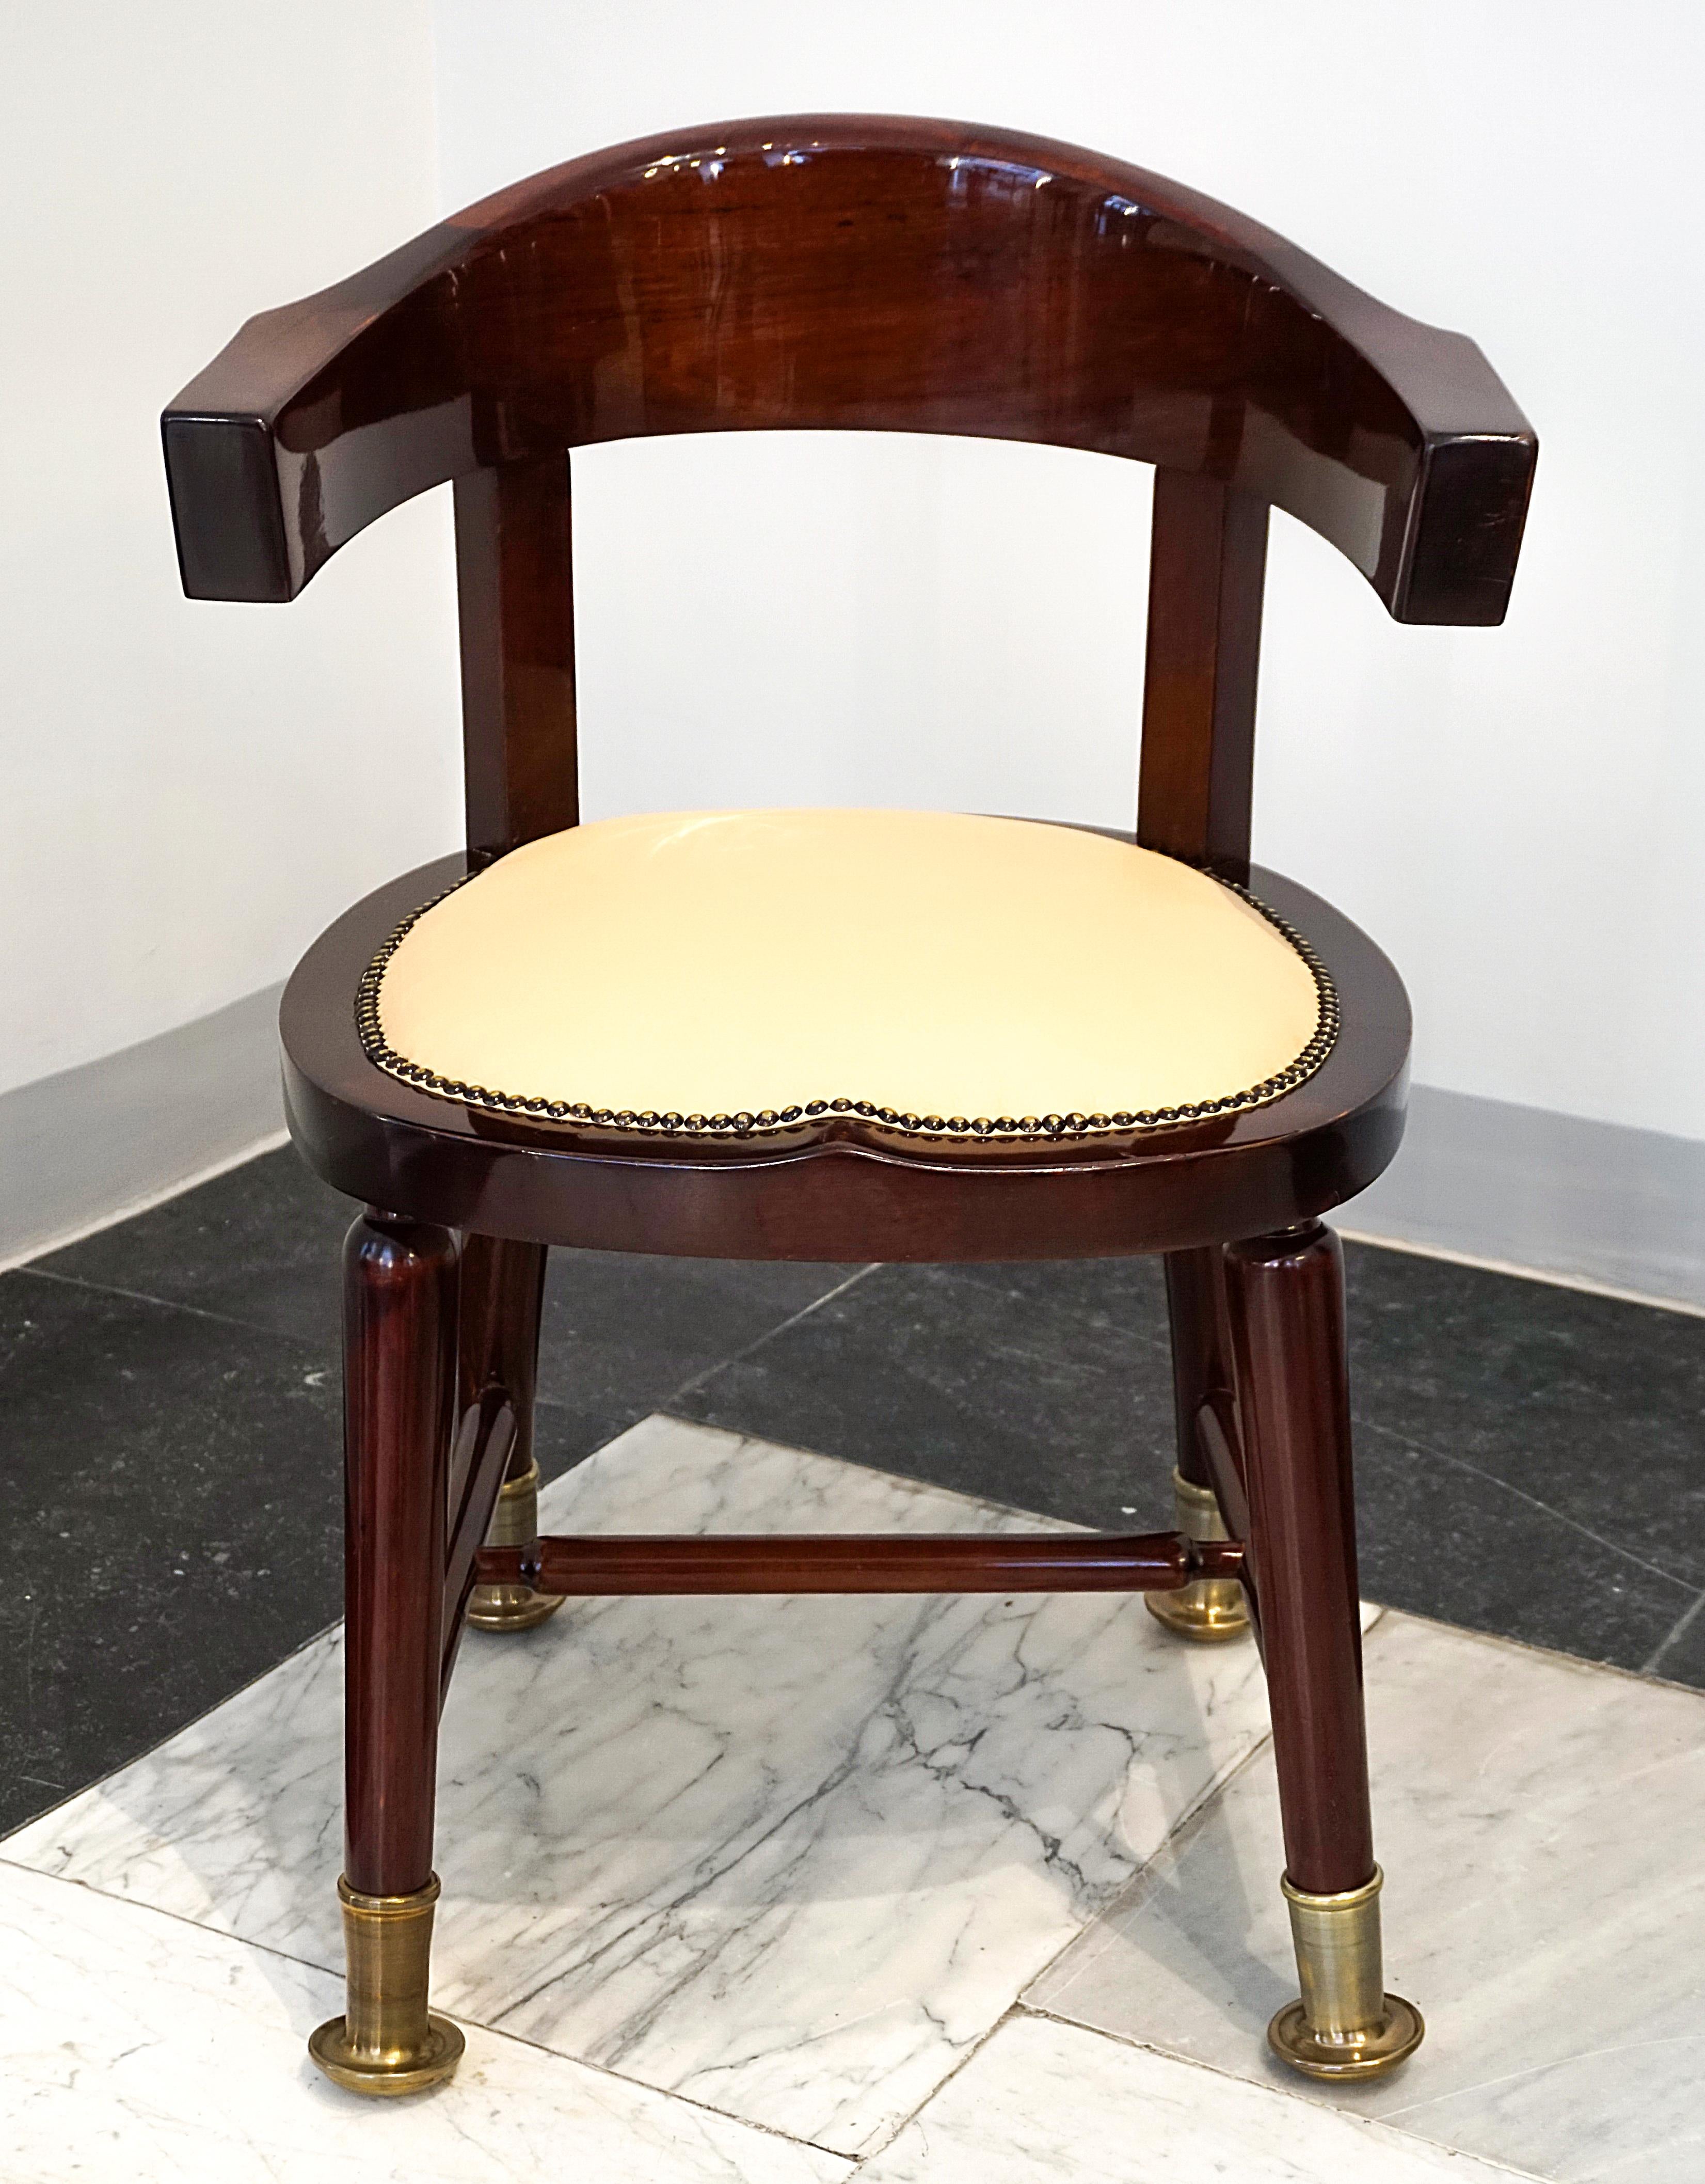 Adolf Loos (1870 - 1933) designed the chair model shown here in 1899 based on an English model as part of his earliest work as an interior designer for the dining room in Eugen Stössler's apartment in Vienna. The omission of the front supports of